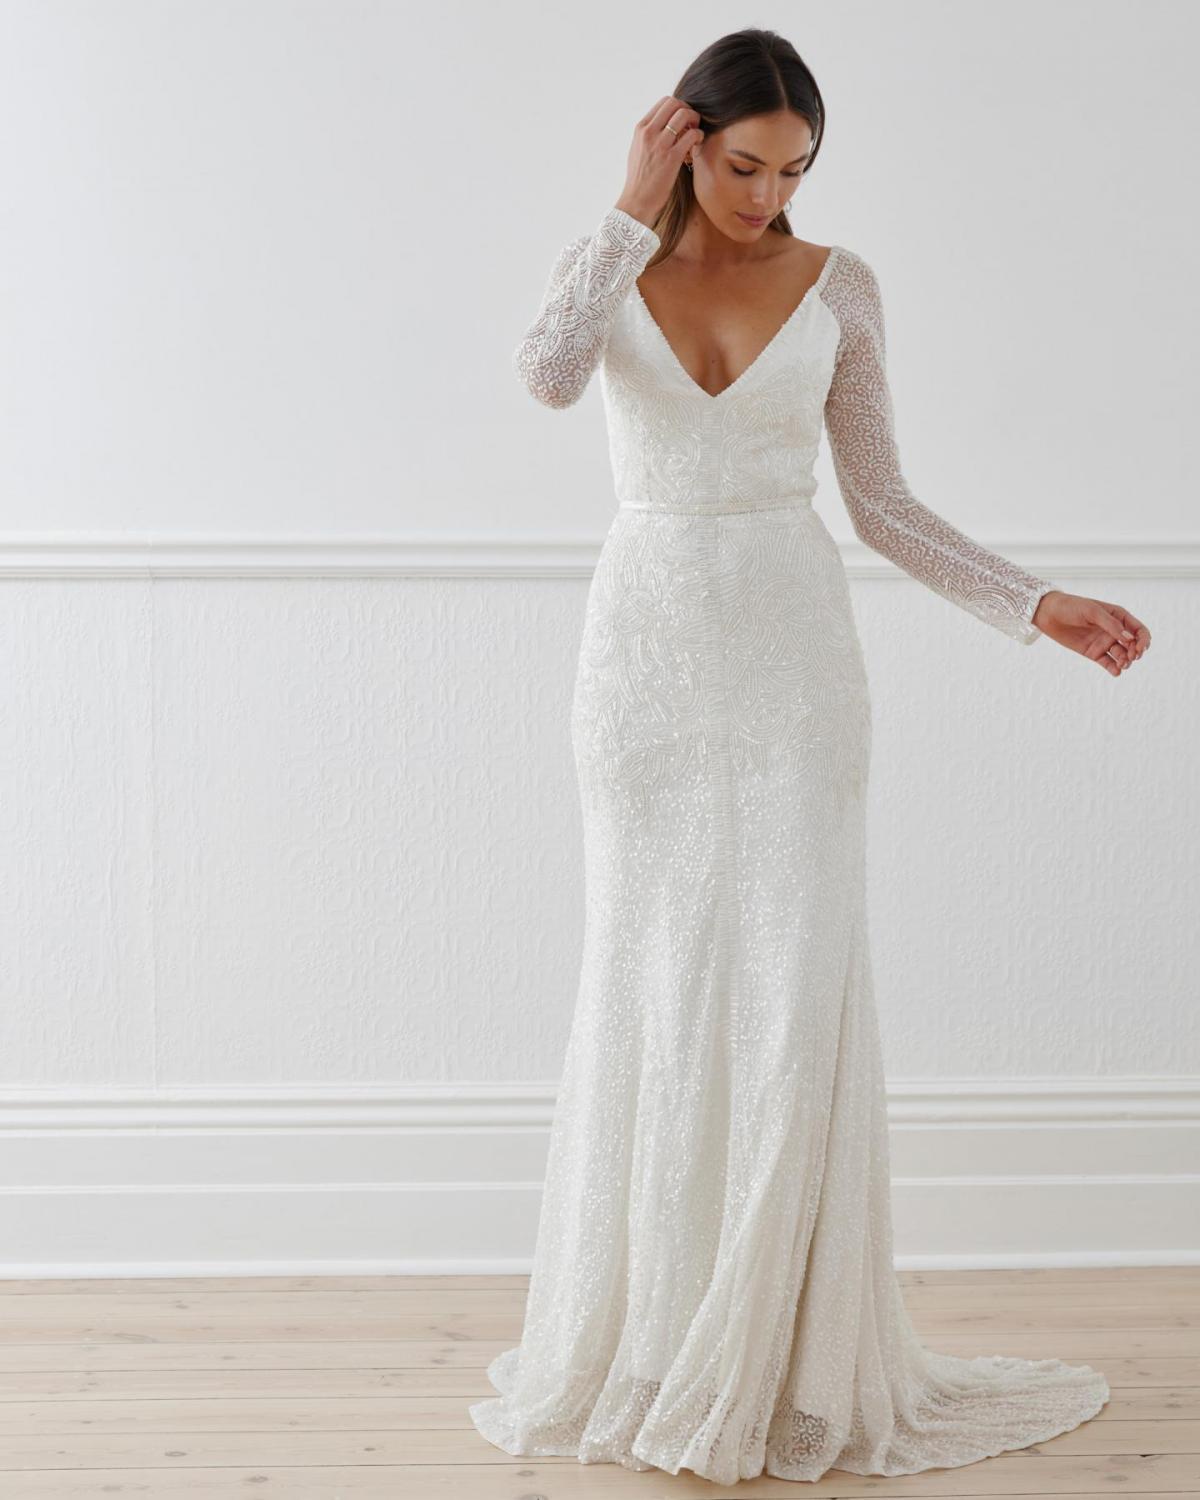 The Celine gown by Karen Willis Holmes, fit and flare beaded wedding dress